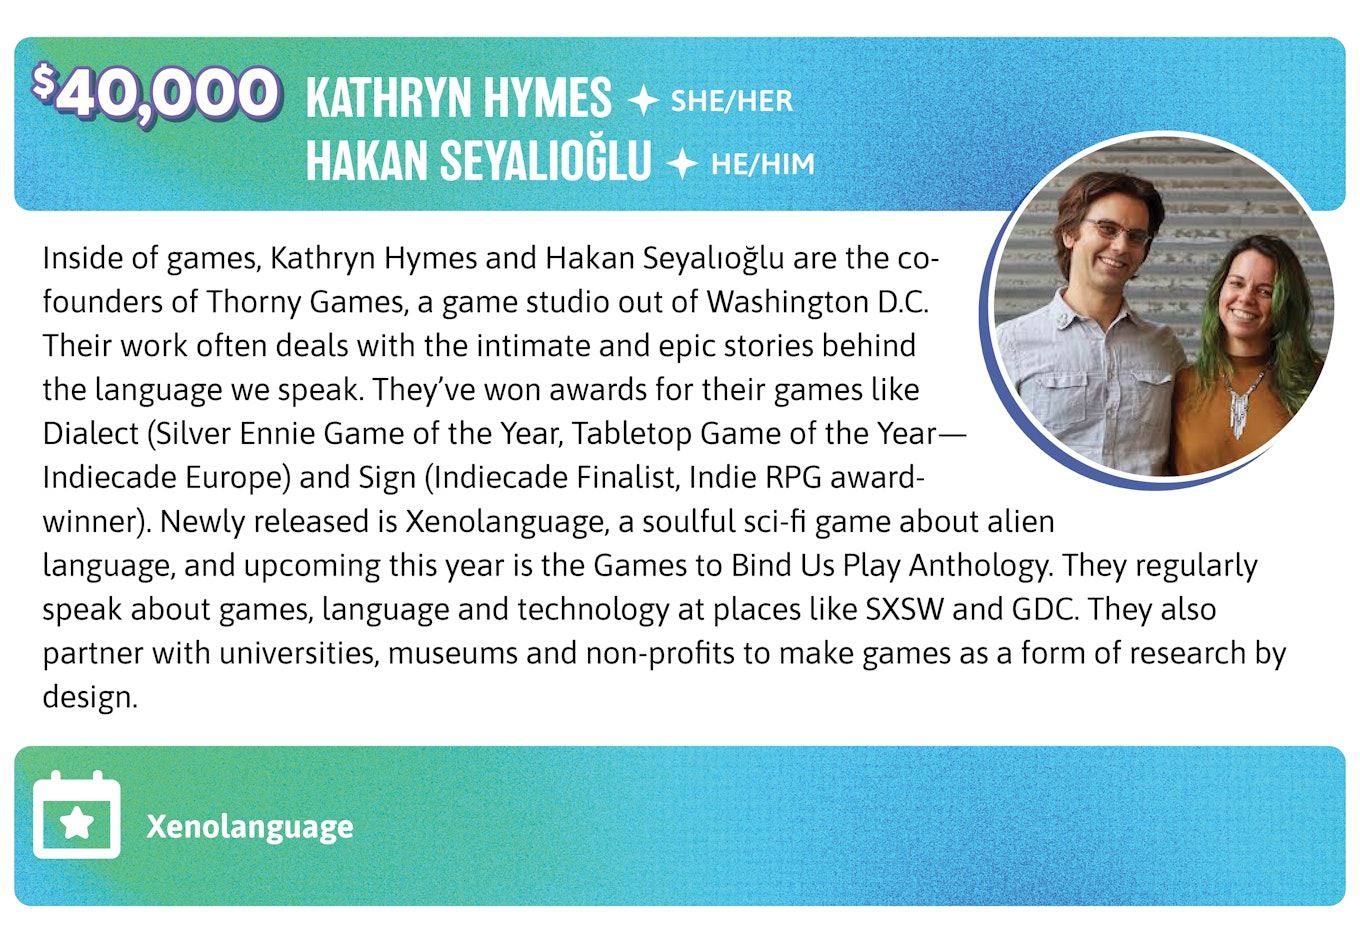 40,00. Inside of games, Kathryn Hymes and Hakan Seyalıoğlu are the co-founders of Thorny Games, a game studio out of Washington D.C. Their work often deals with the intimate and epic stories behind the language we speak. They’ve won awards for their games like Dialect (Silver Ennie Game of the Year, Tabletop Game of the Year—Indiecade Europe) and Sign (Indiecade Finalist, Indie RPG award-winner). Newly released is Xenolanguage, a soulful sci-fi game about alien language, and upcoming this year is the Games to Bind Us Play Anthology. They regularly speak about games, language and technology at places like SXSW and GDC. They also partner with universities, museums and non-profits to make games as a form of research by design.